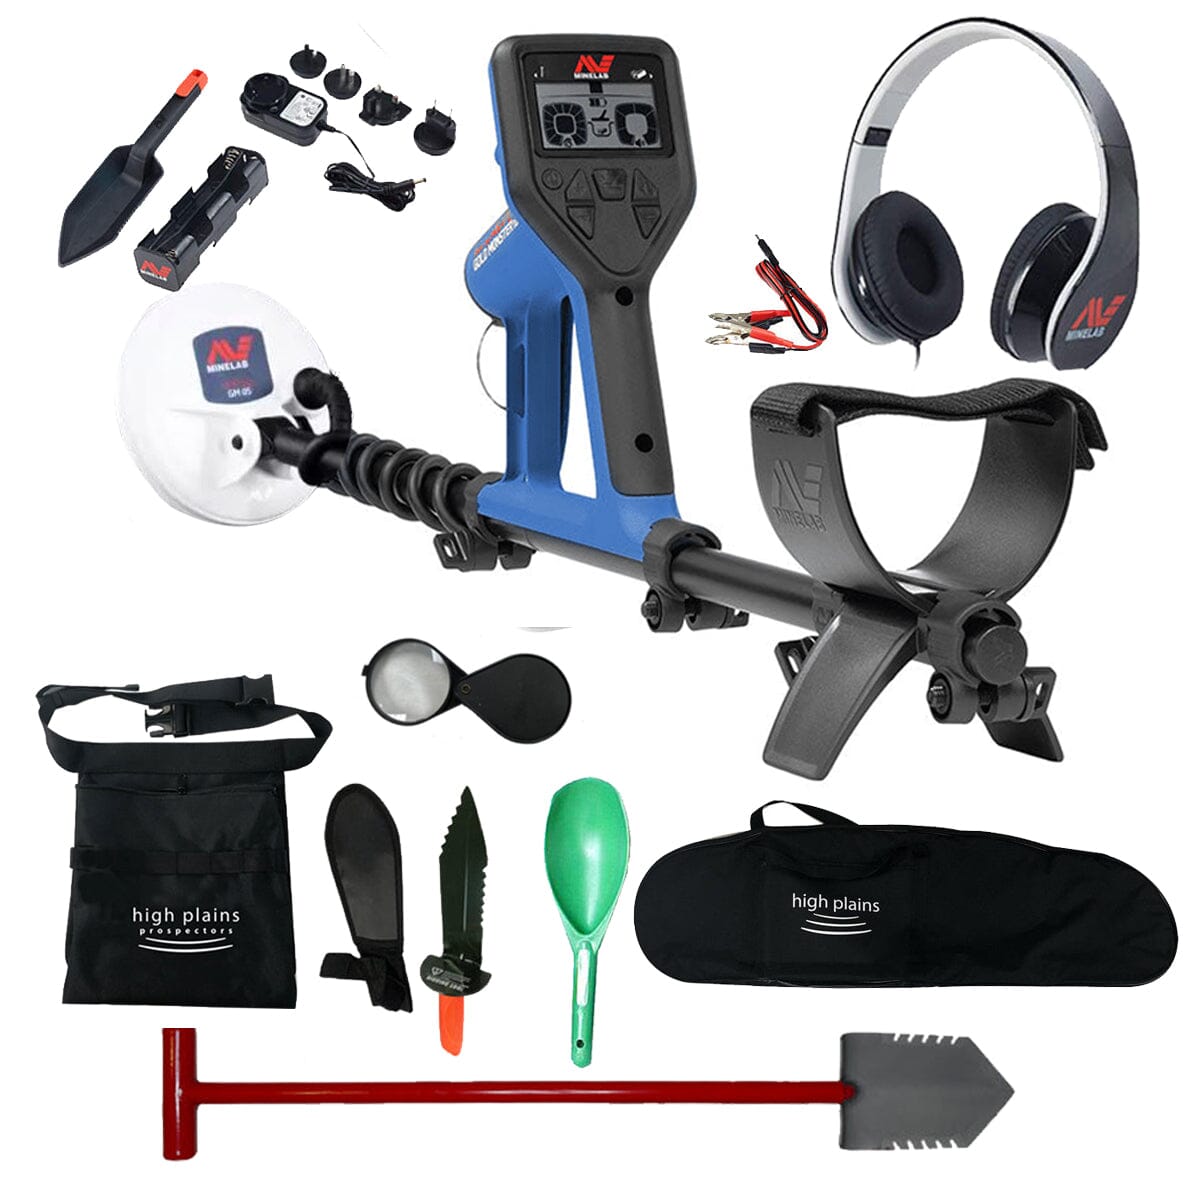 Minelab Gold Monster 1000 Metal Detector with Carry Bag, Shovel and More Free Gear